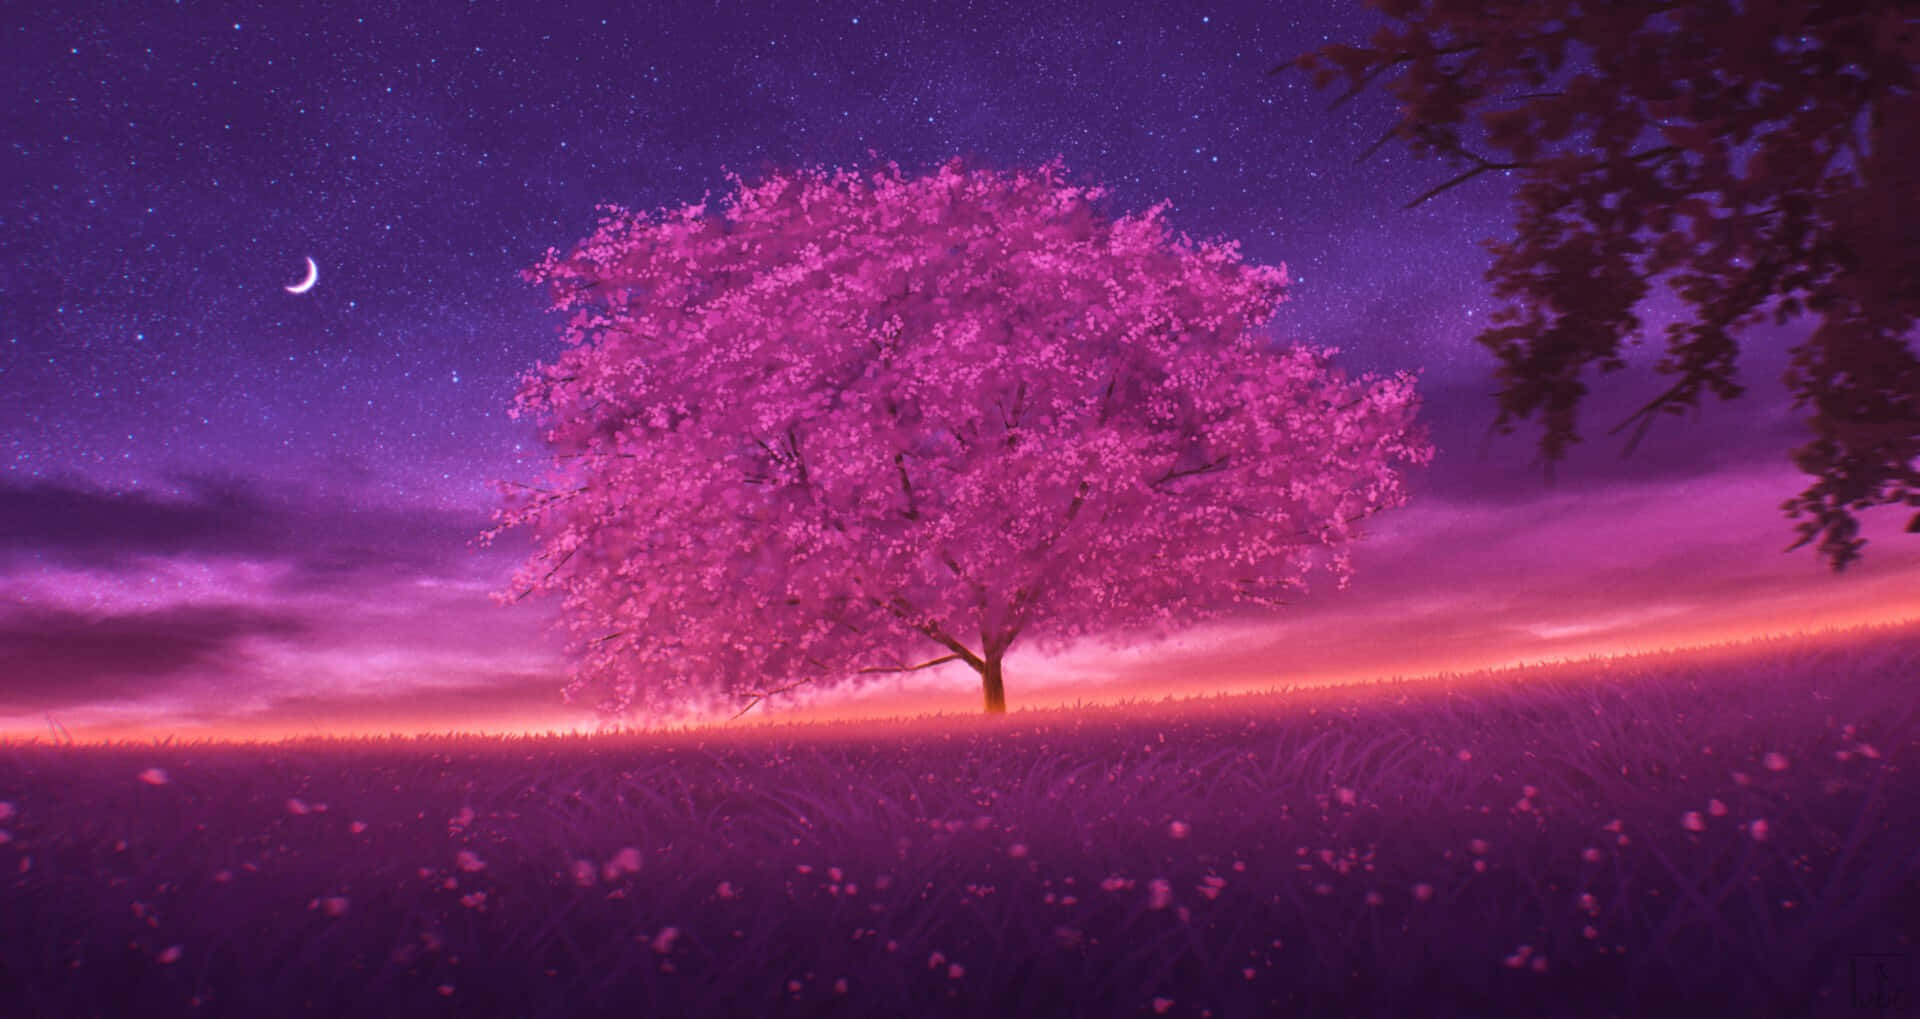 Get lost in the beauty of this night cherry blossom tree Wallpaper